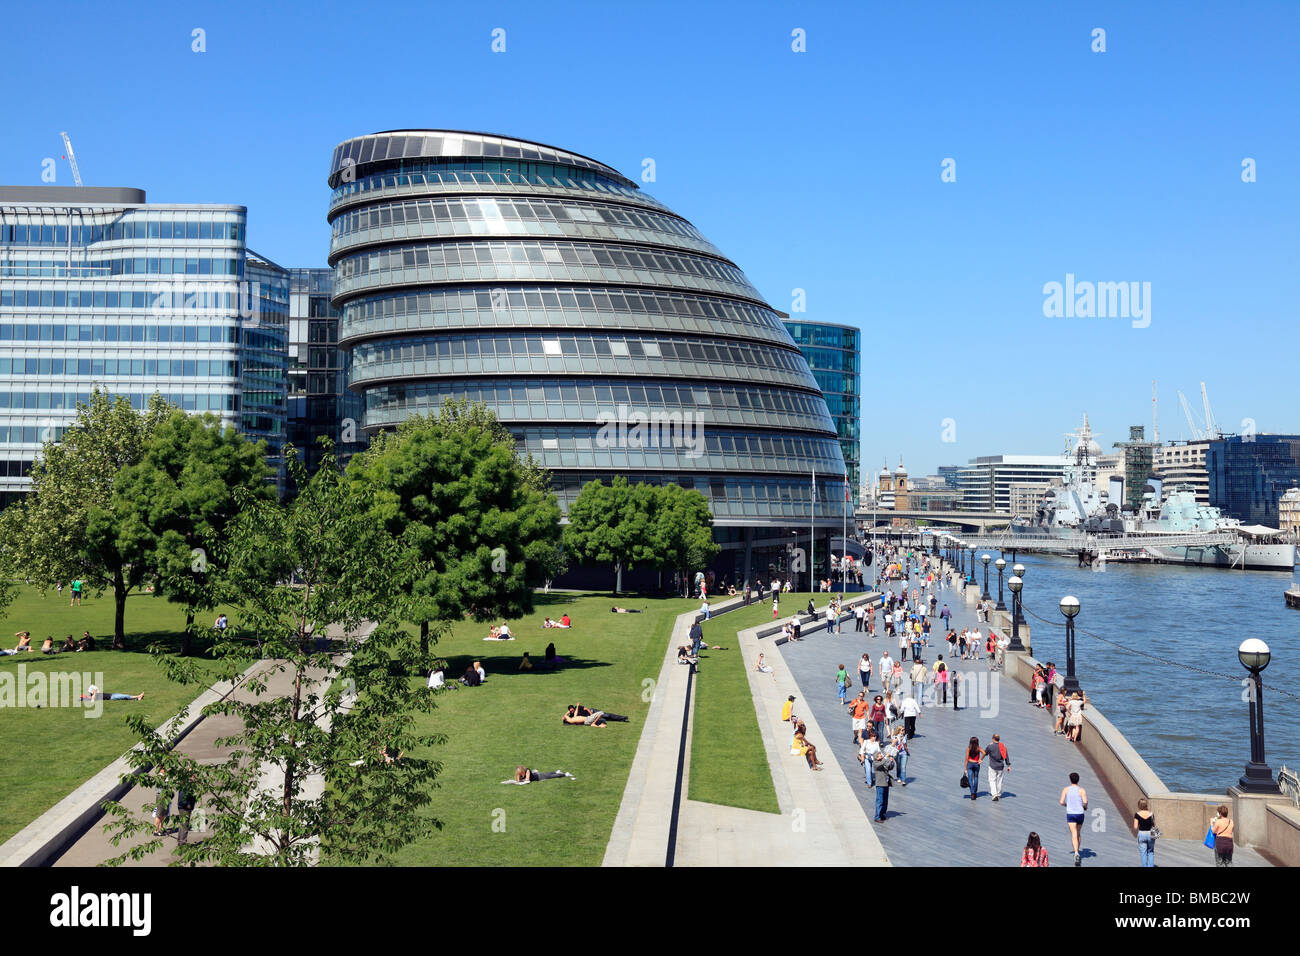 City Hall  London the headquarters for the Greater London Authority (GLA) and the Mayor of London. Stock Photo